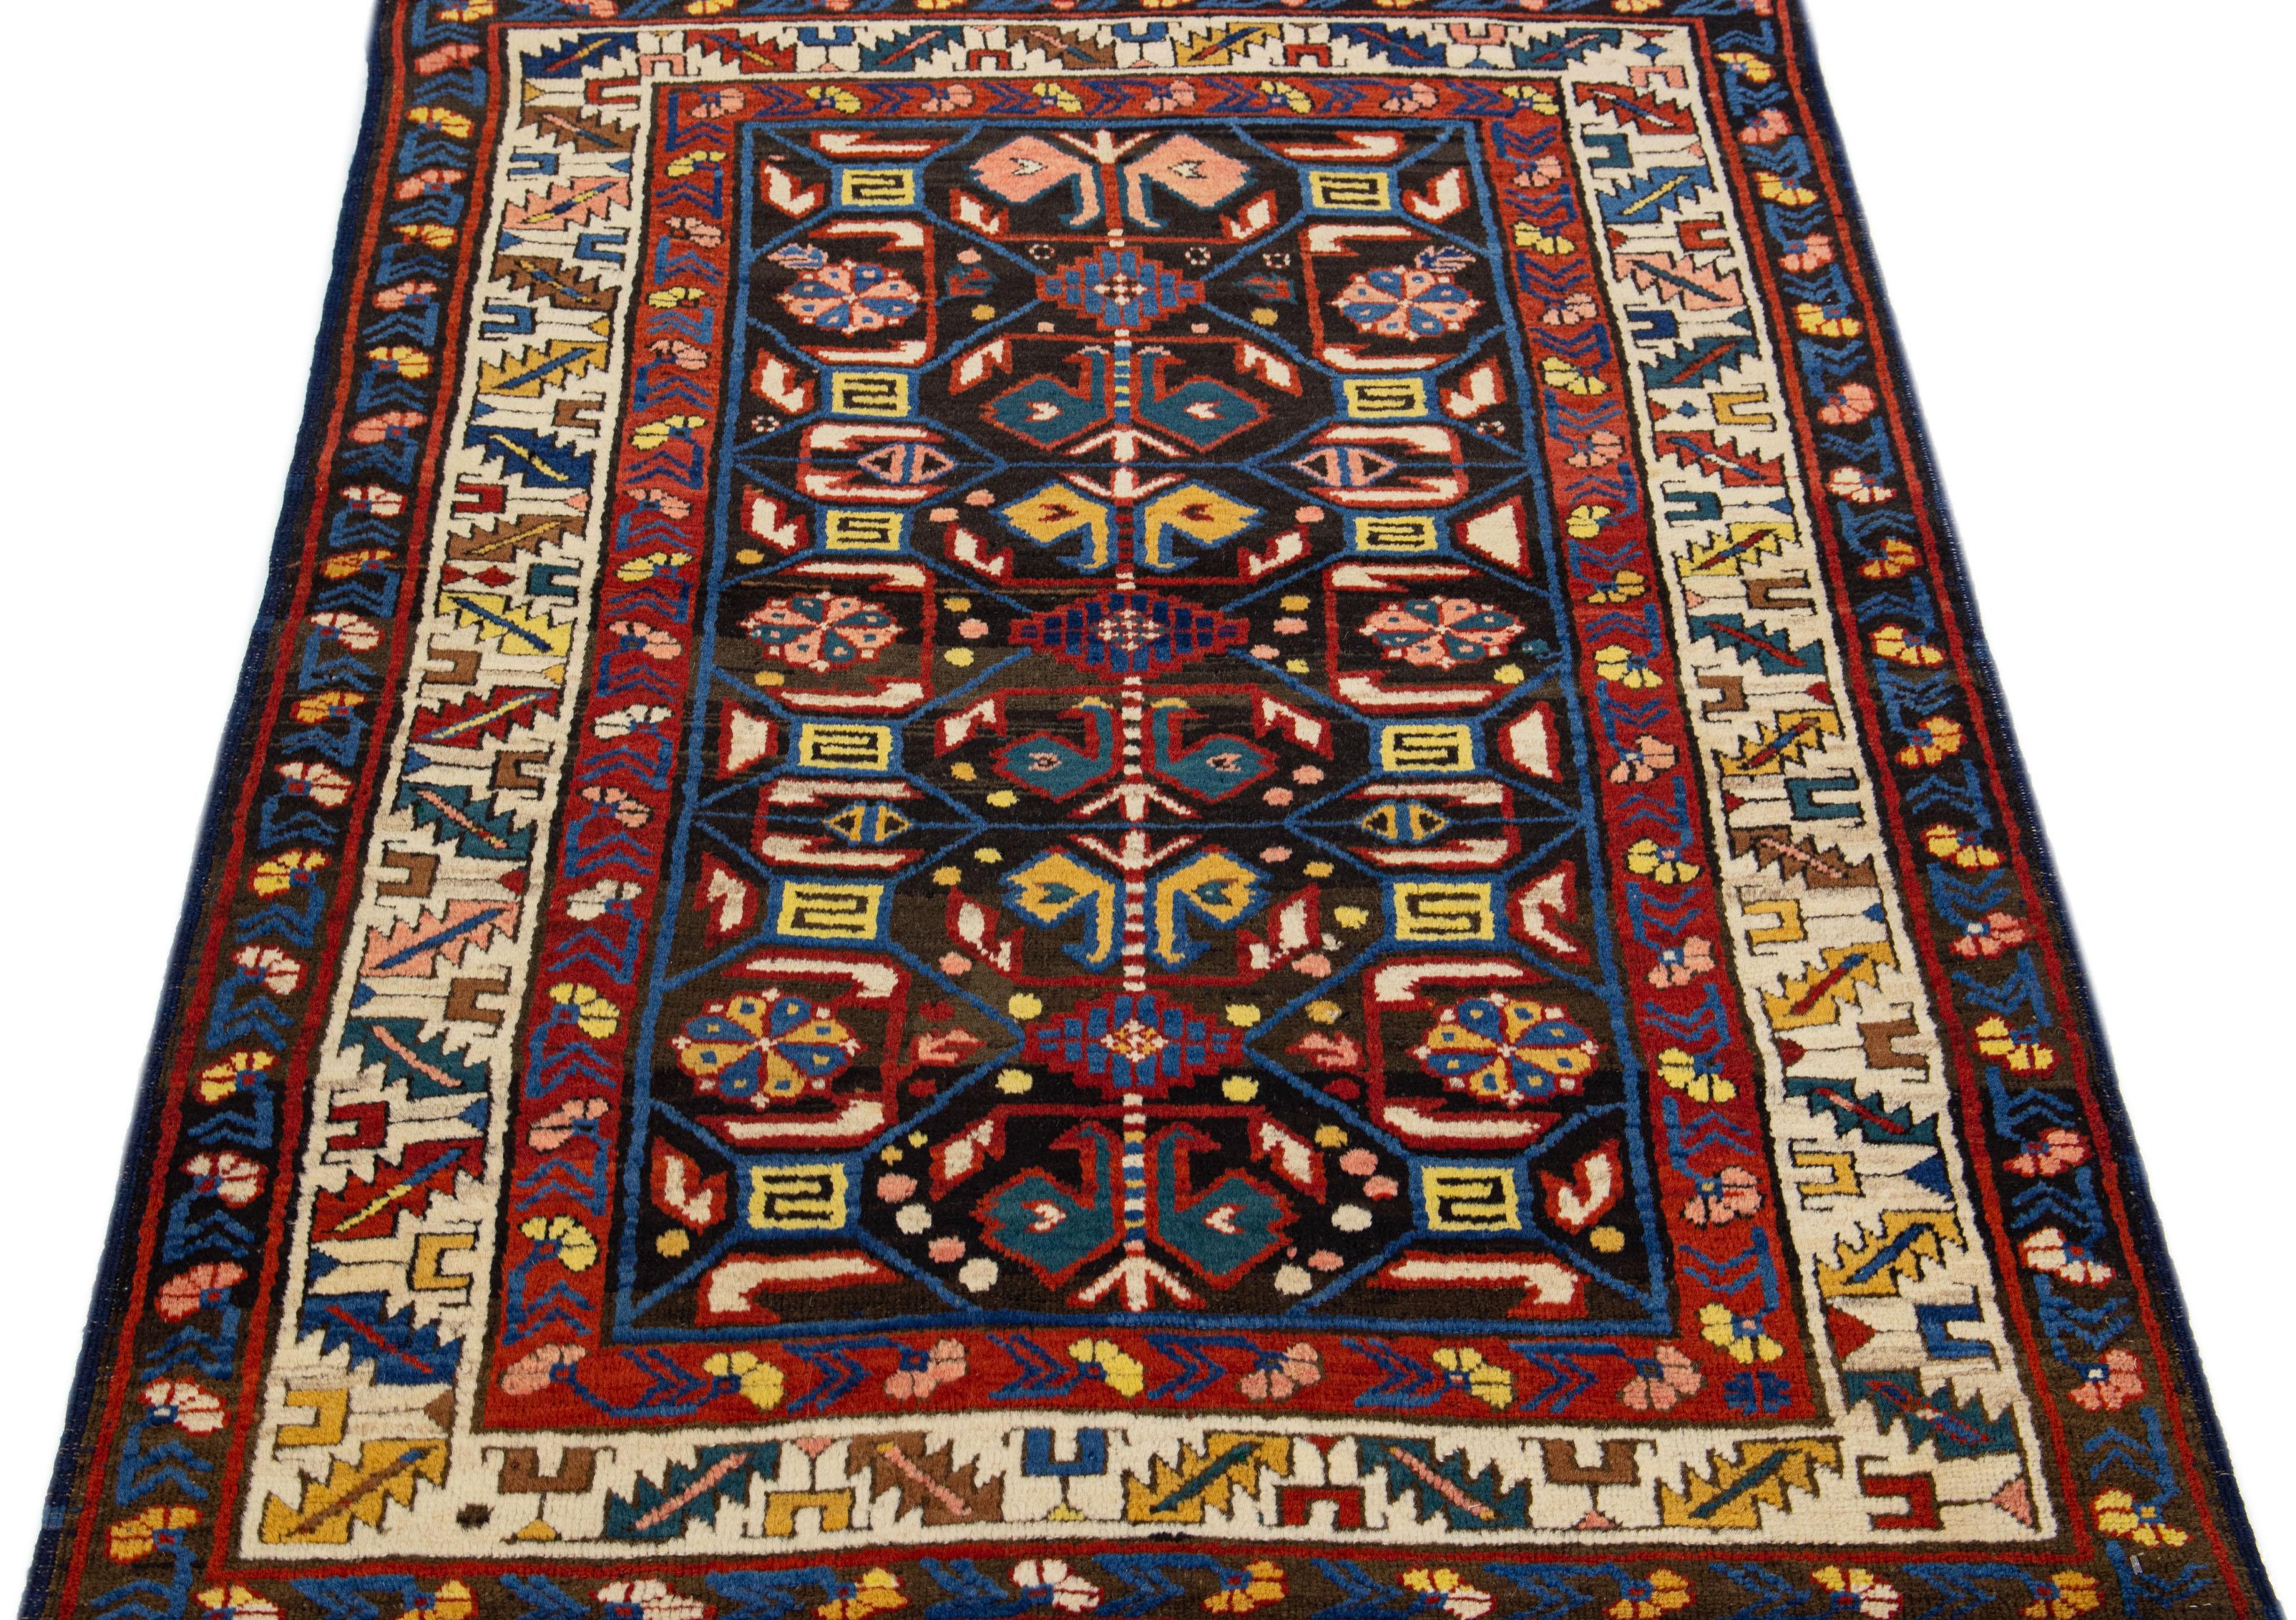 1900s Kazak wool rug, meticulously crafted by hand. The rug boasts a rich brown color palette, adorned with delicate embellishments in varying shades of yellow, peach, blue, and beige, showcasing an intricate geometric pattern that covers the